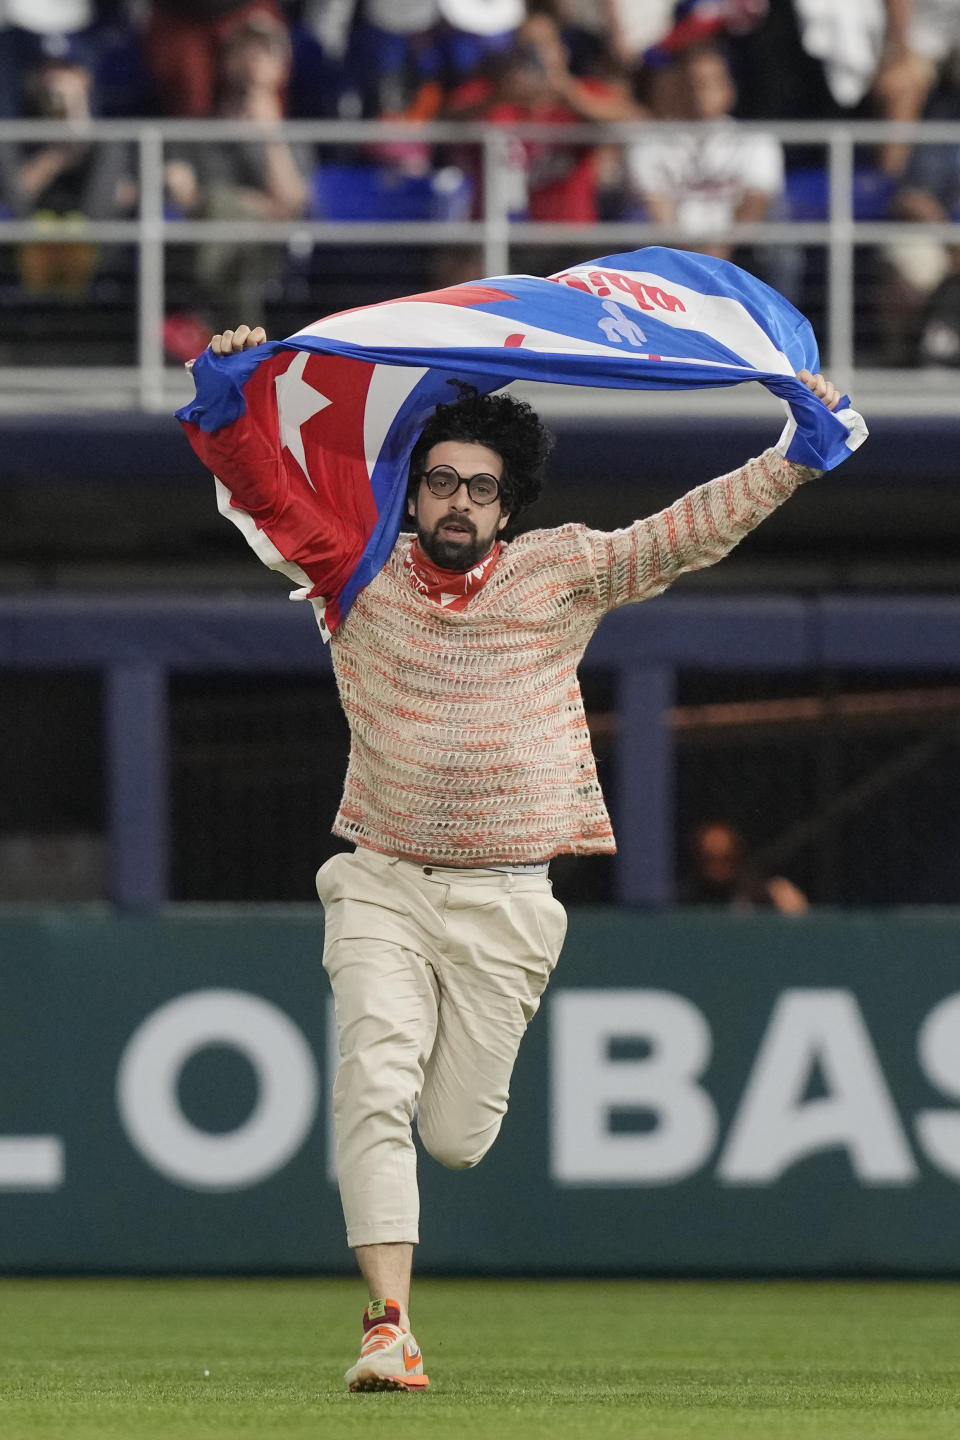 A protestor runs on the field holding a Cuban flag during the eighth inning of a World Baseball Classic game between Cuba and U.S., Sunday, March 19, 2023, in Miami. (AP Photo/Marta Lavandier)